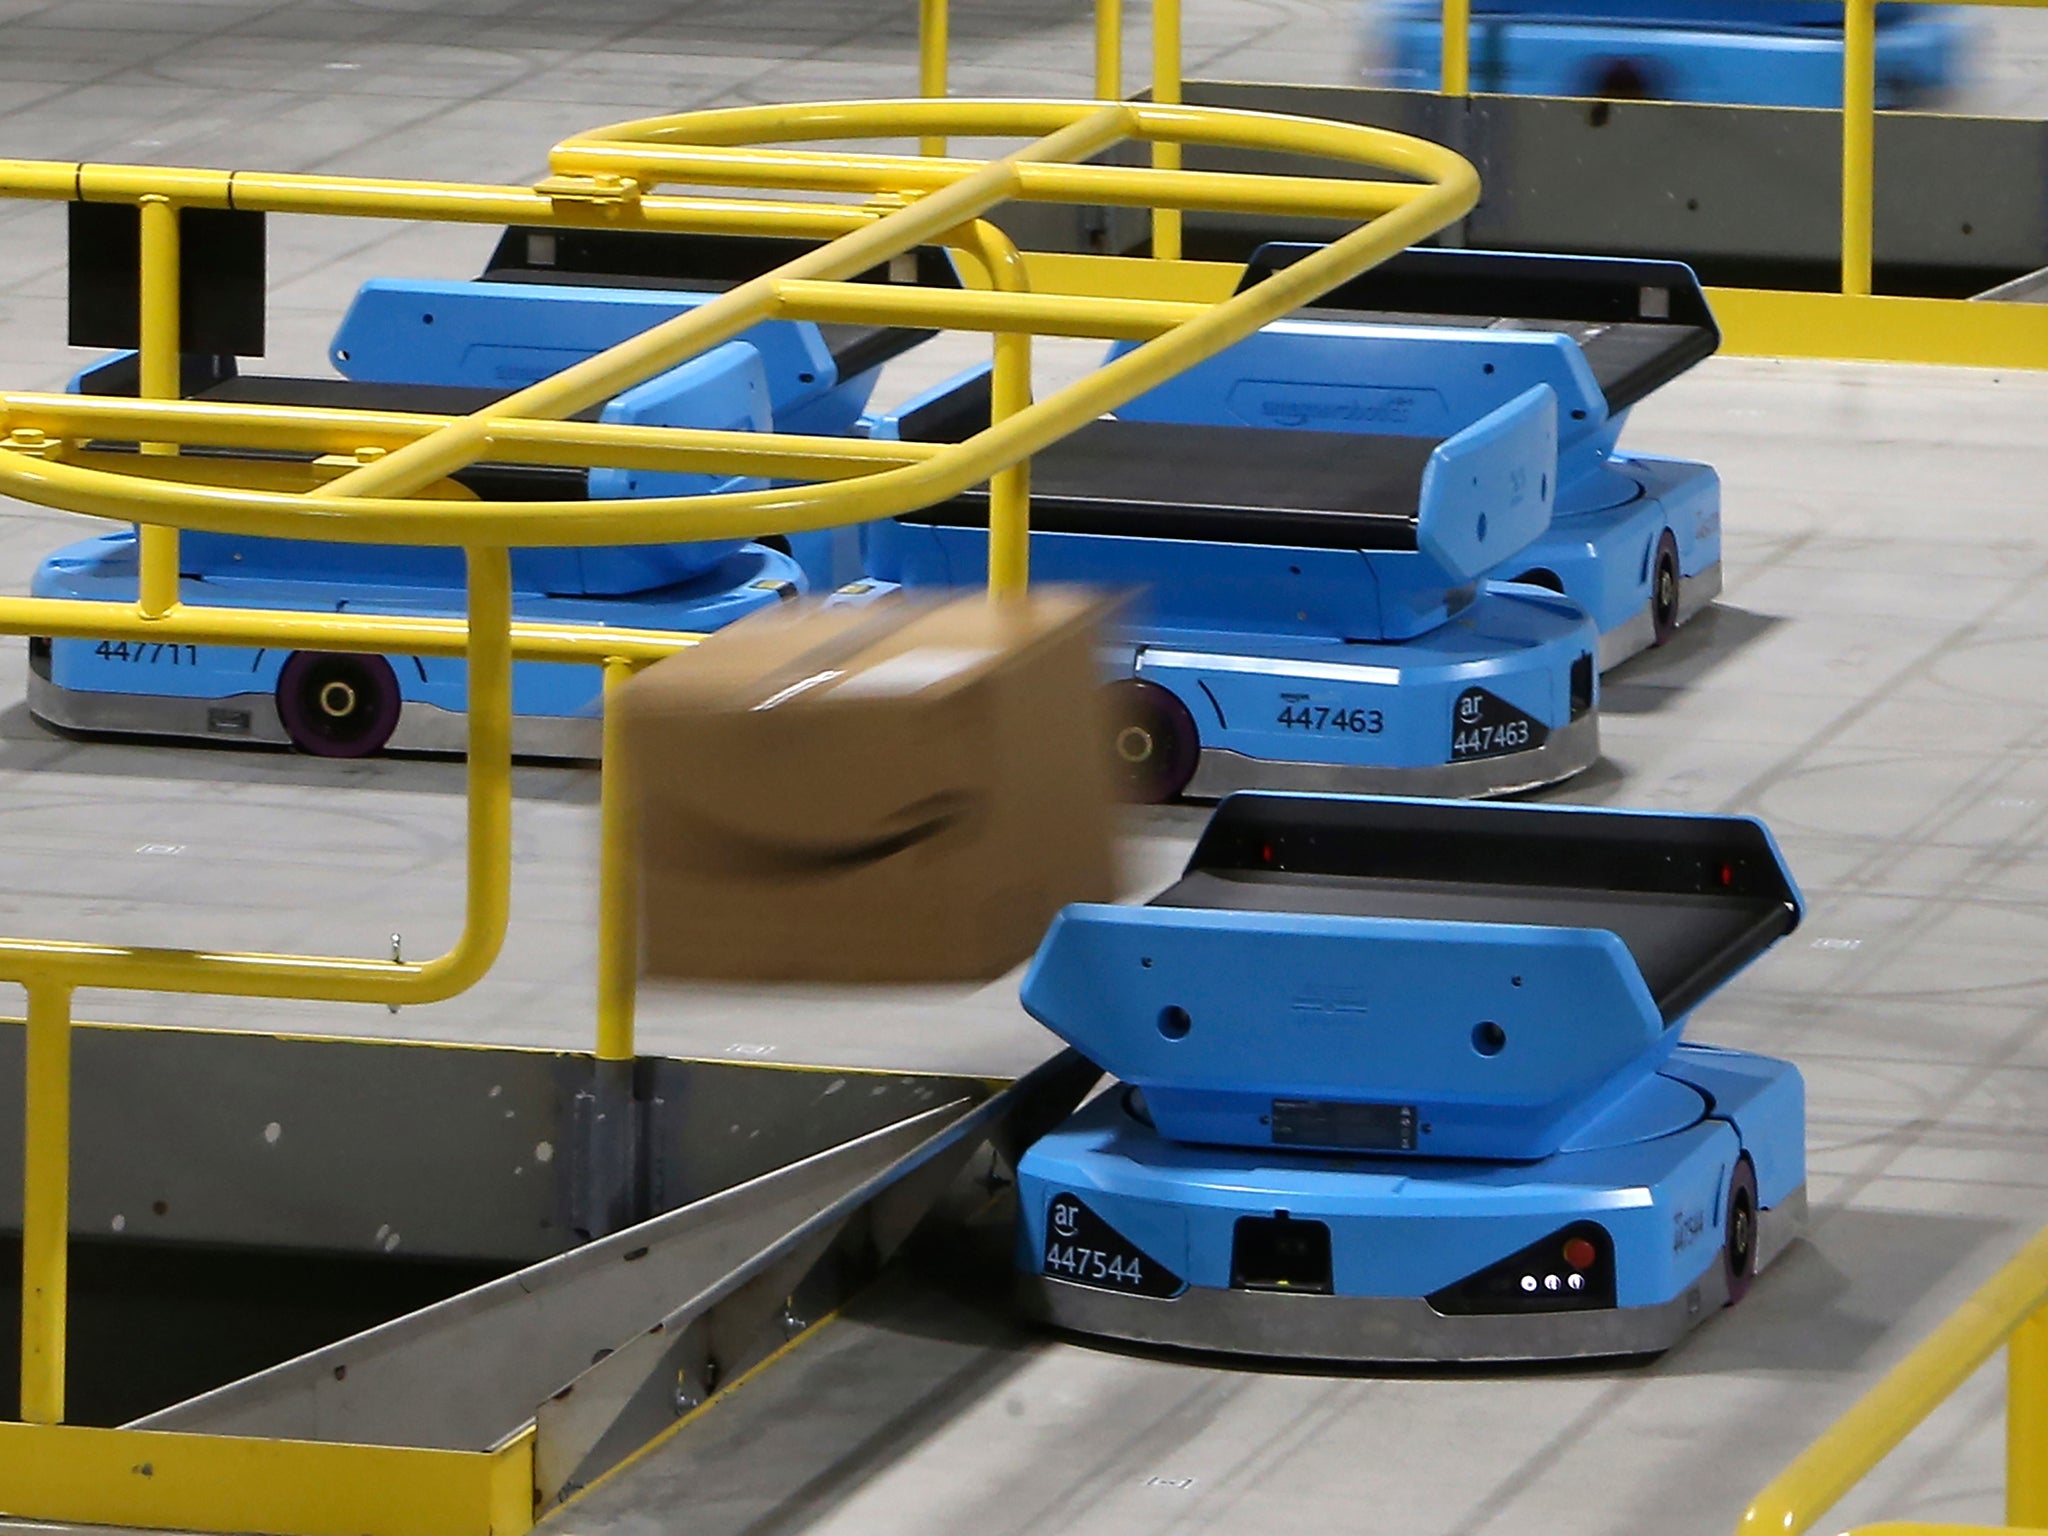 Robots sends packages down a chute which will deliver them to workers